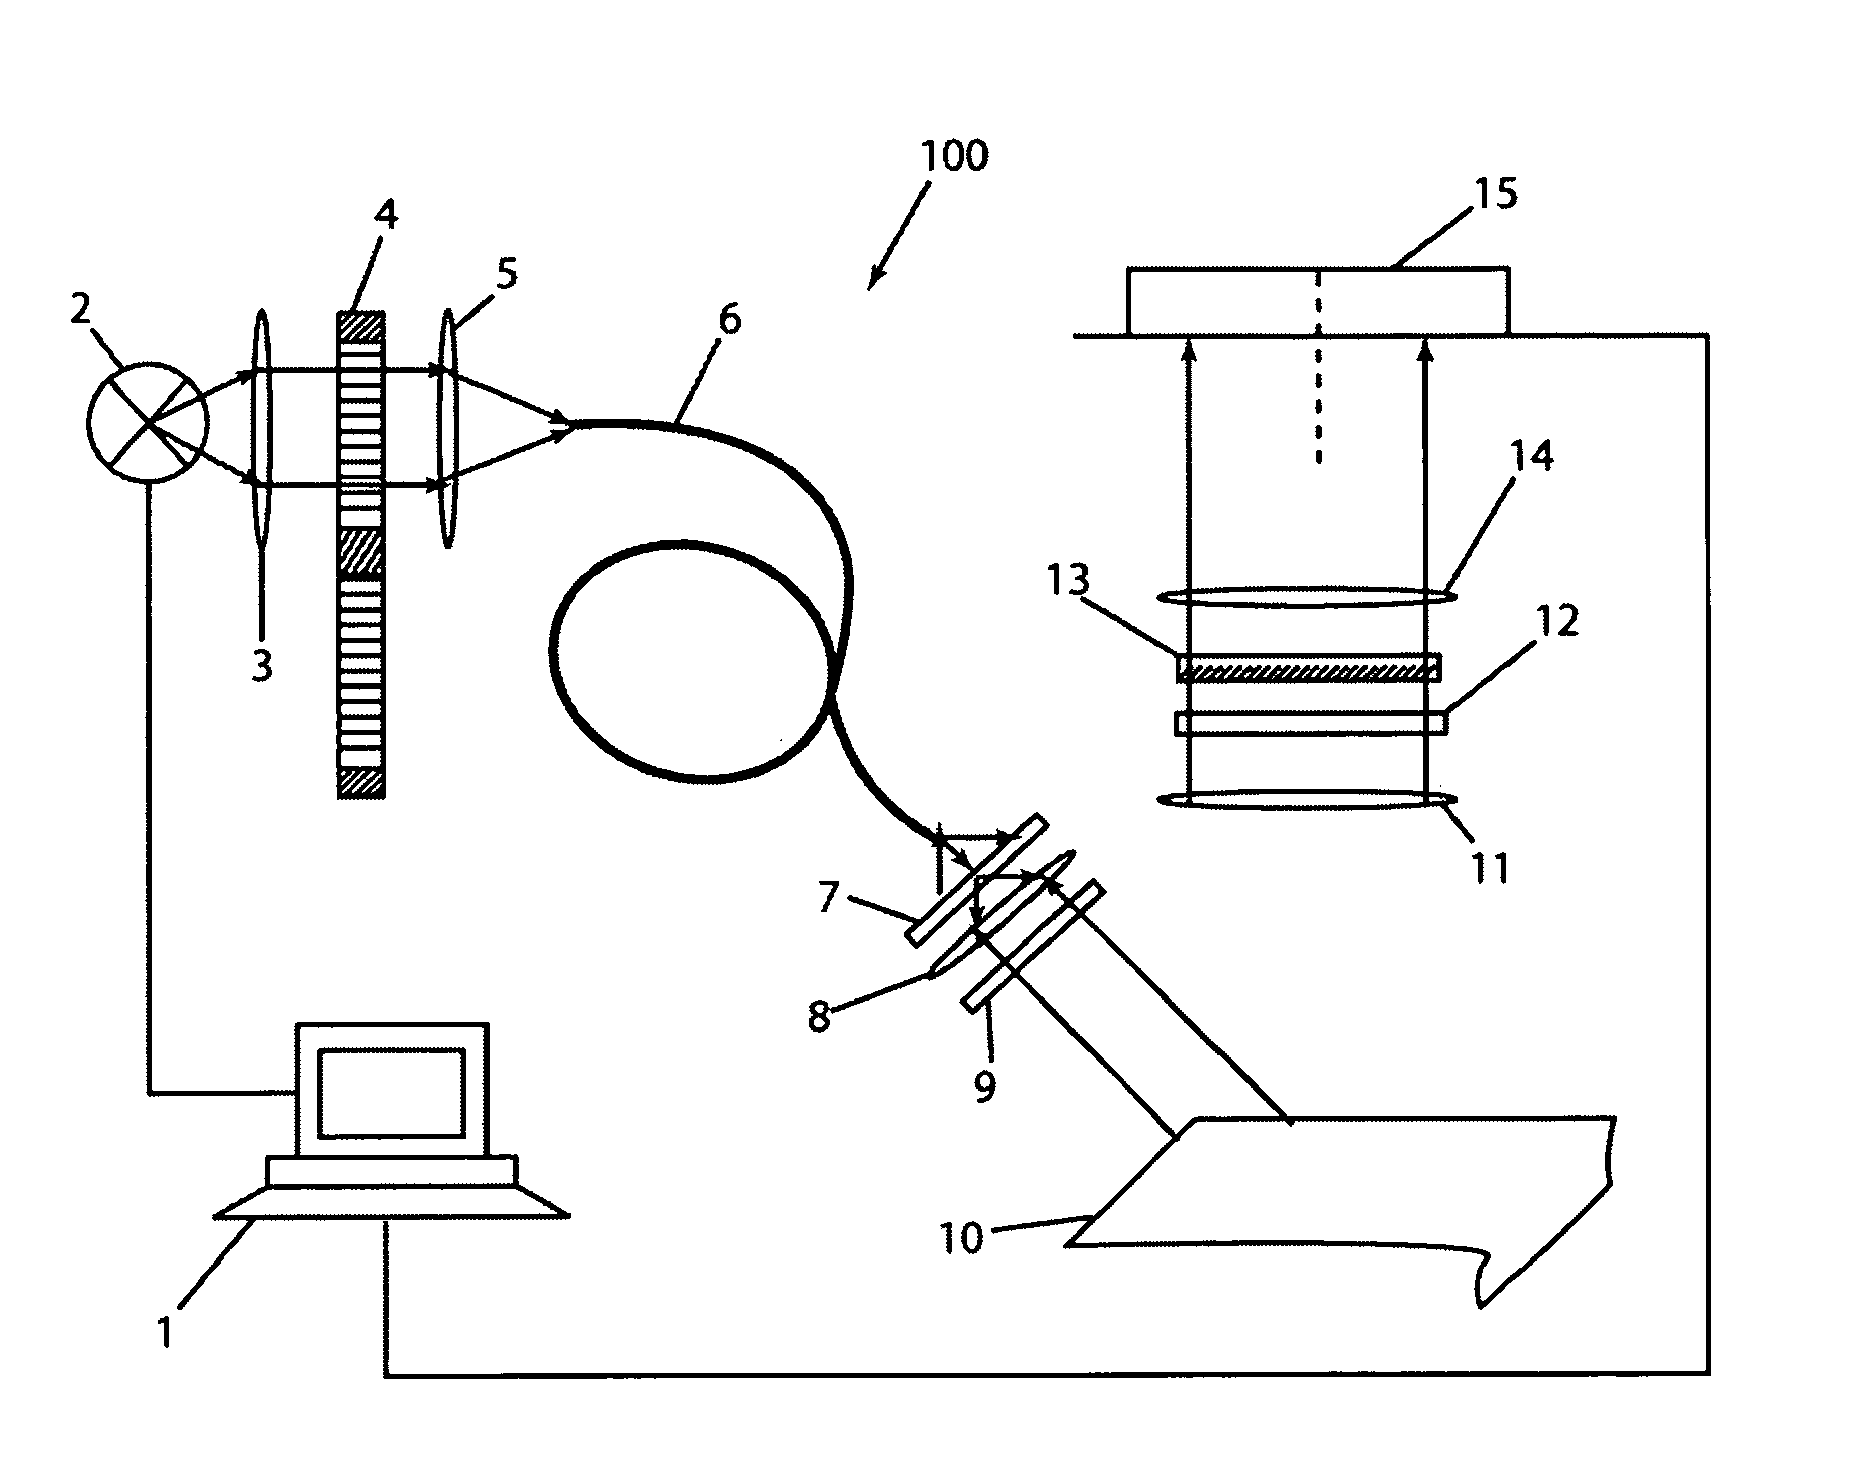 Fluorescence polarization imaging devices and methods